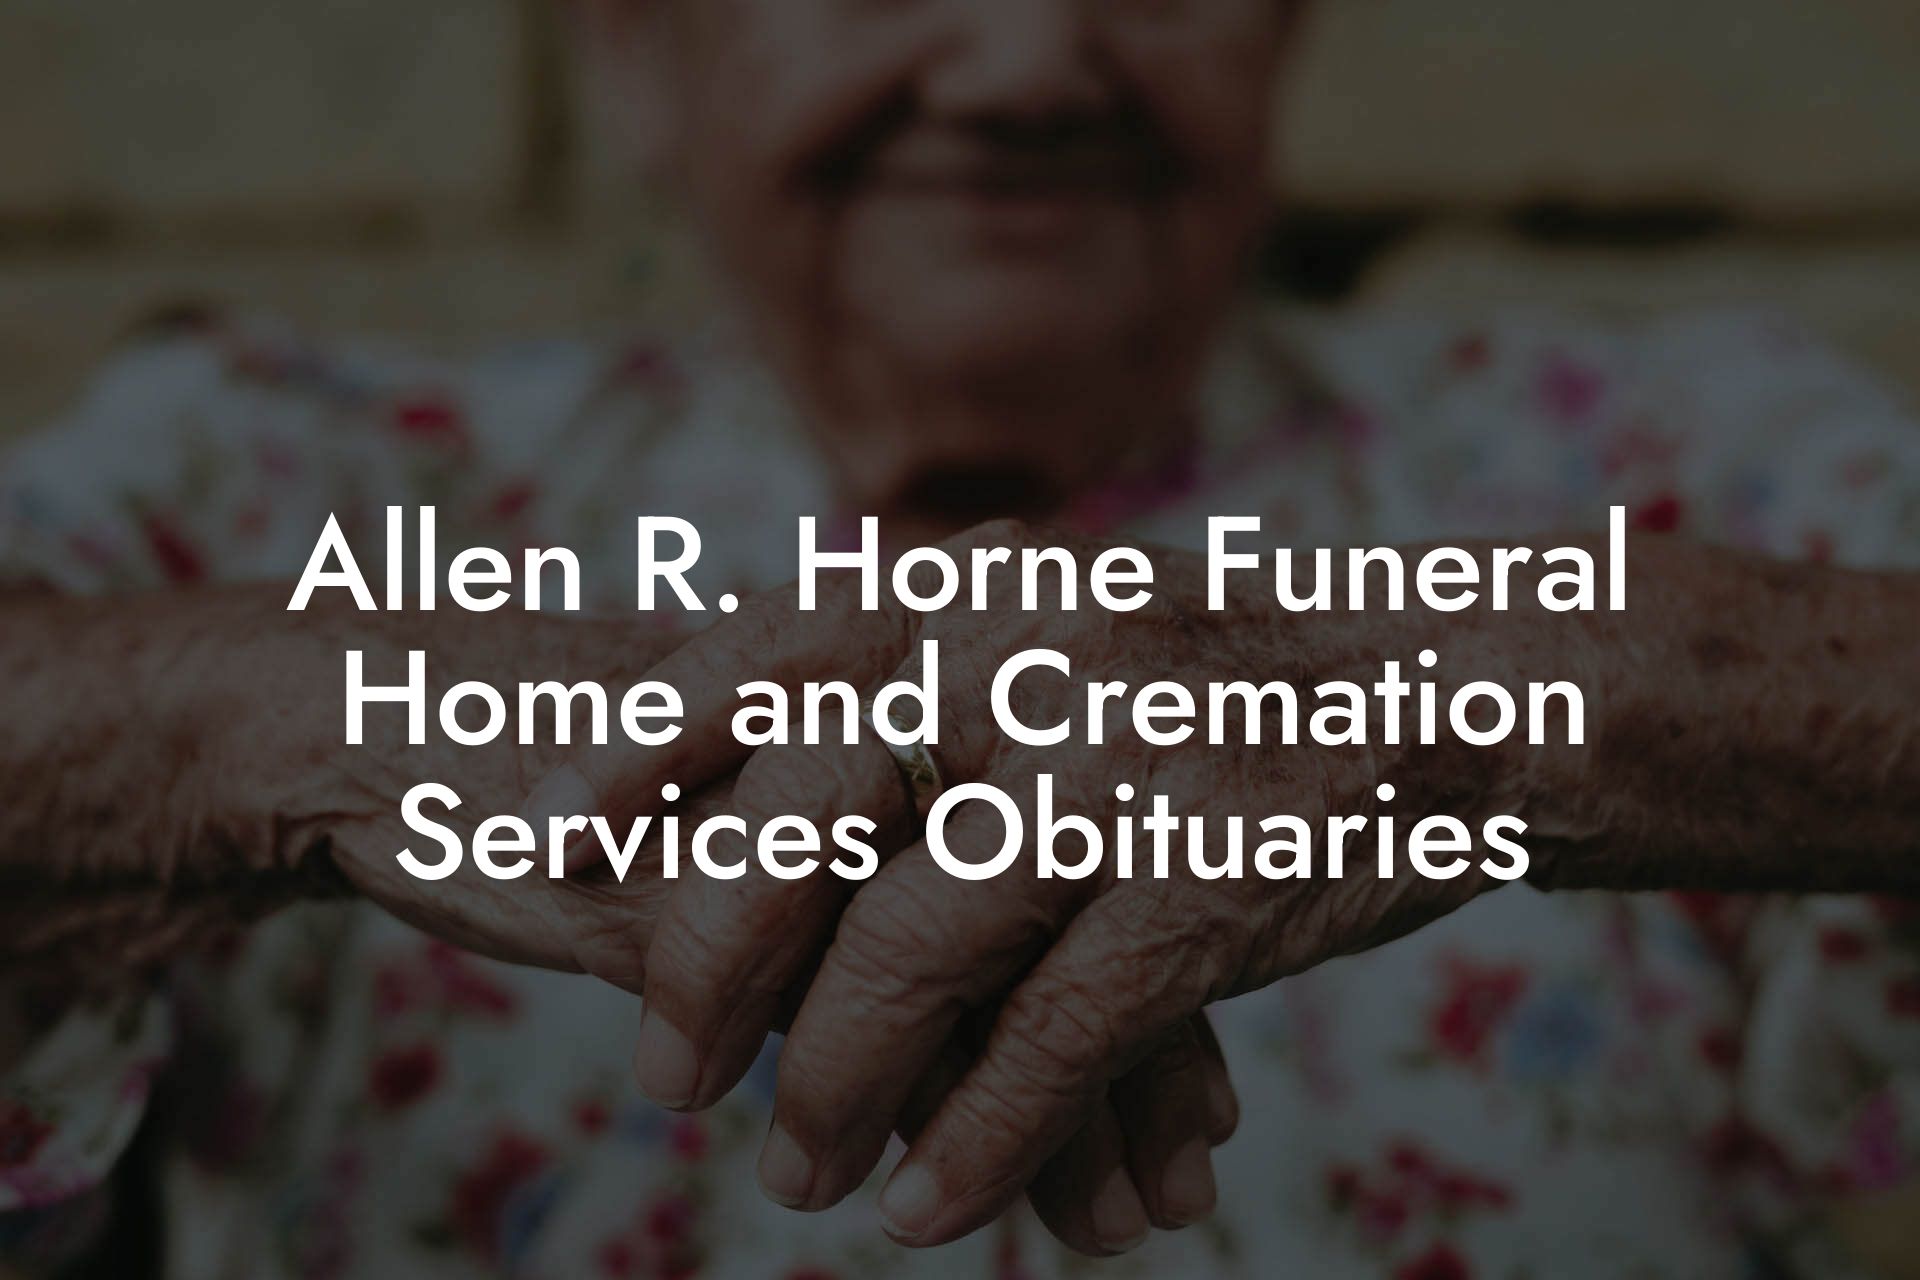 Allen R. Horne Funeral Home and Cremation Services Obituaries